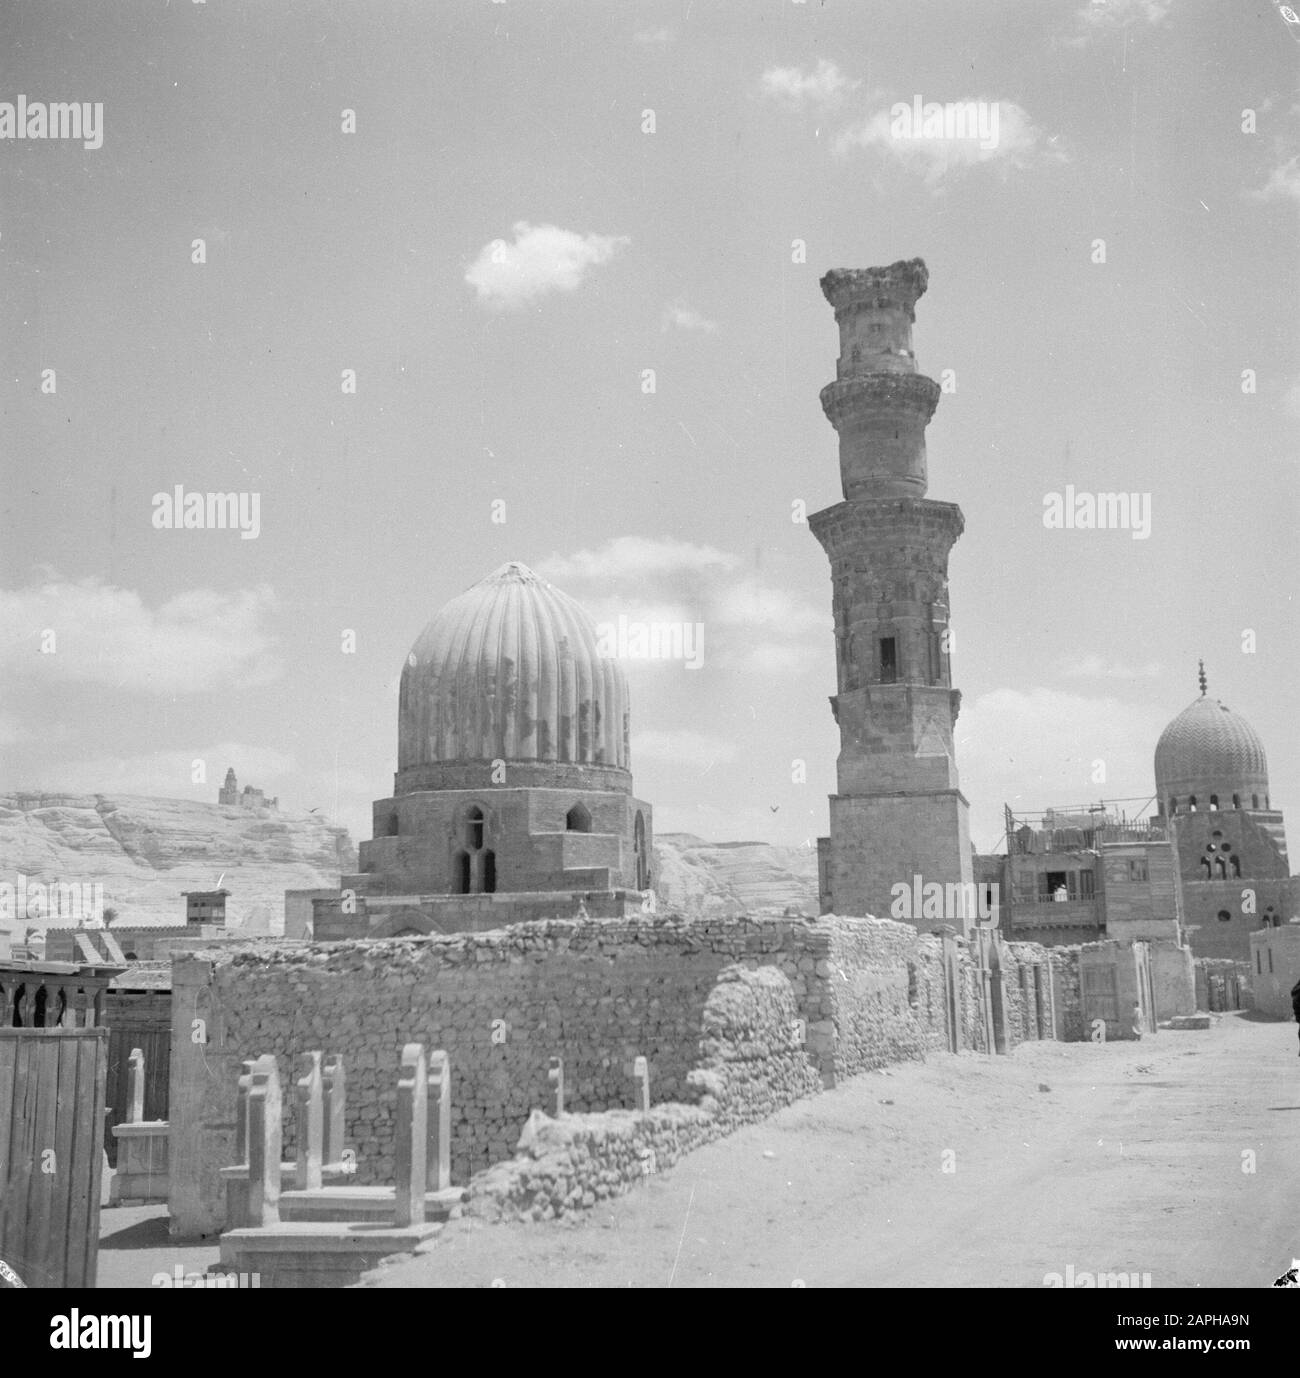 Middle East 1950-1955: Egypt Description: The City of Death in Cairo Annotation: This photo is also registered under number POLL006/B-587 Date: 1950 Location: Cairo, Egypt Keywords: cemeteries, saint places, minarets, mosques Stock Photo